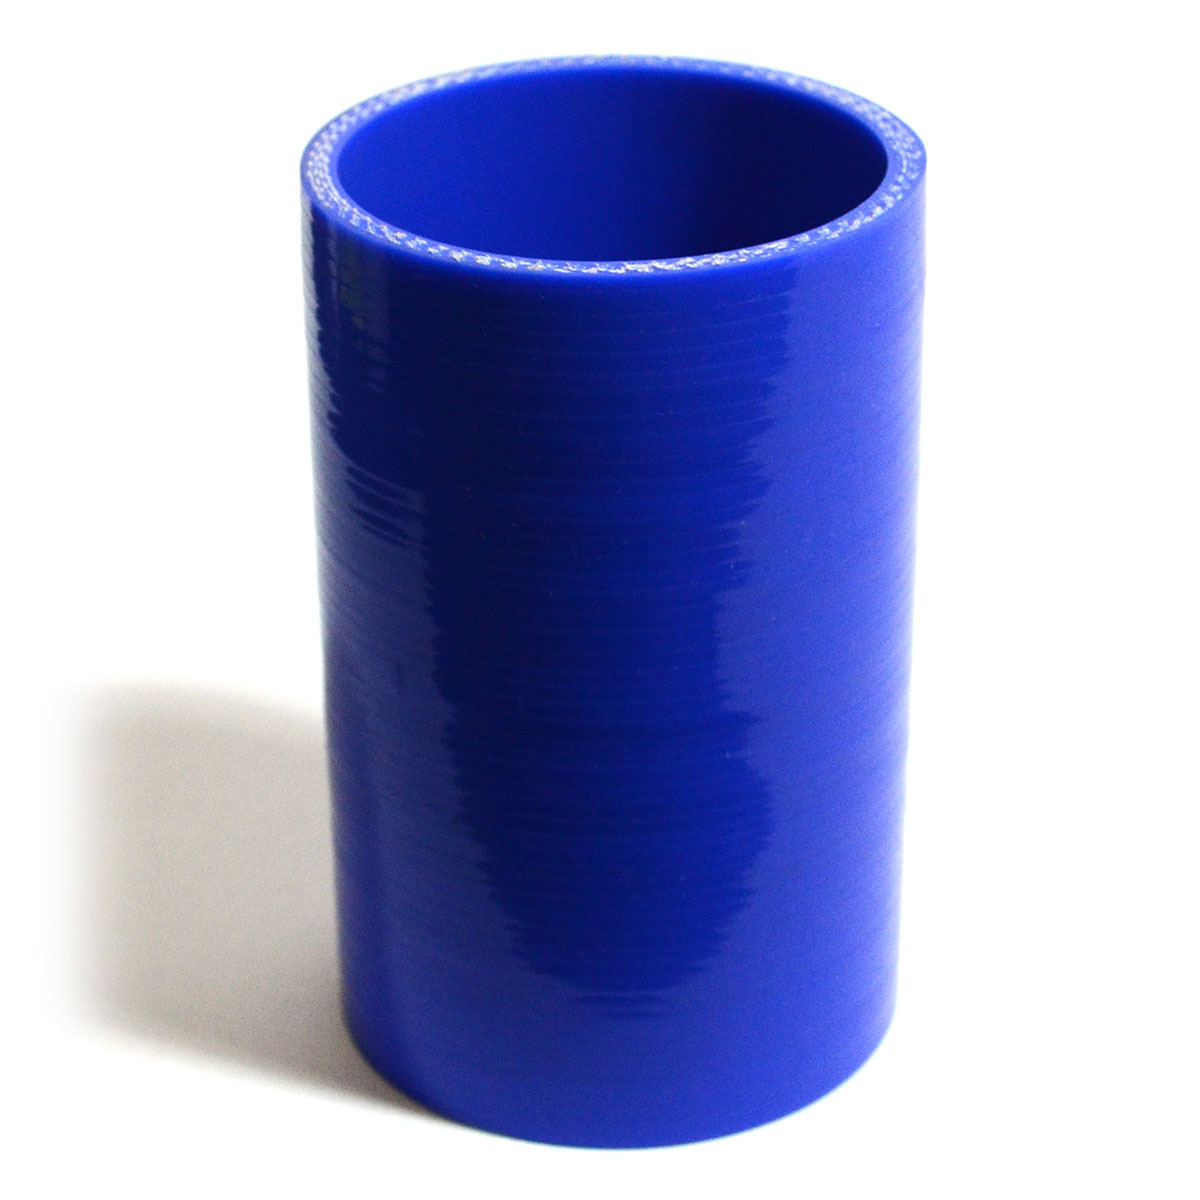 Straight 4 Ply Silicone Hose 70mm x 70mm x 127mm Blue